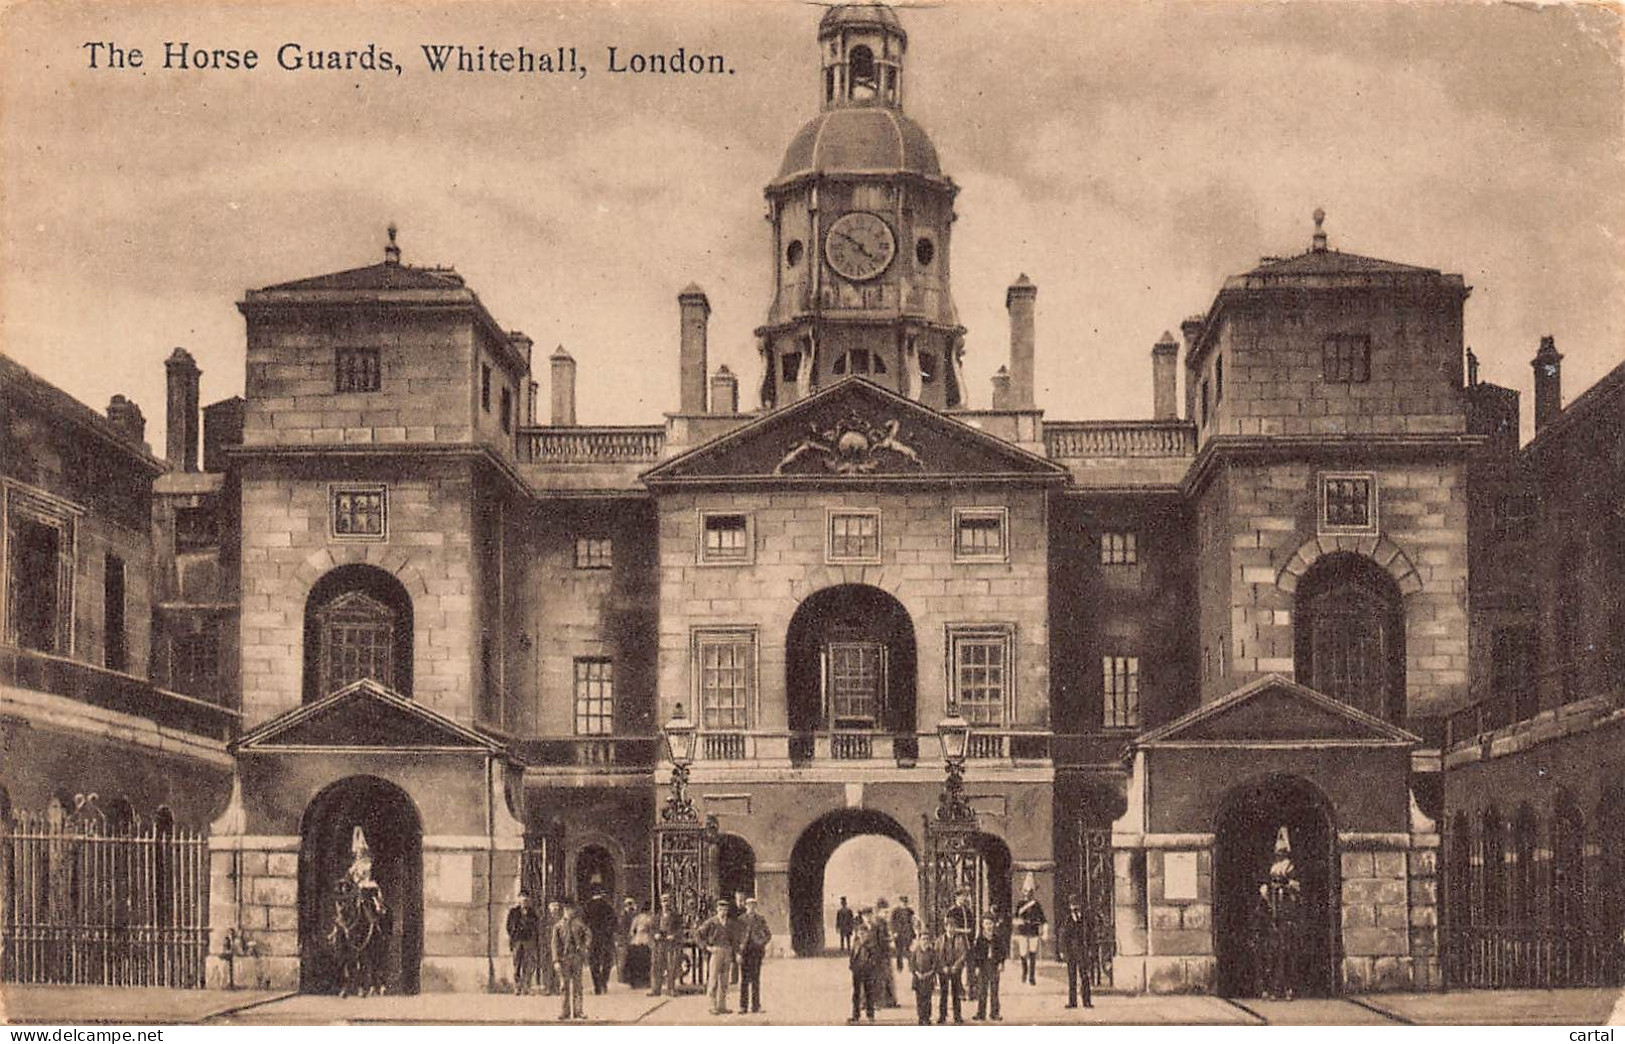 LONDON - WHITEHALL - The Horse Guards - Whitehall